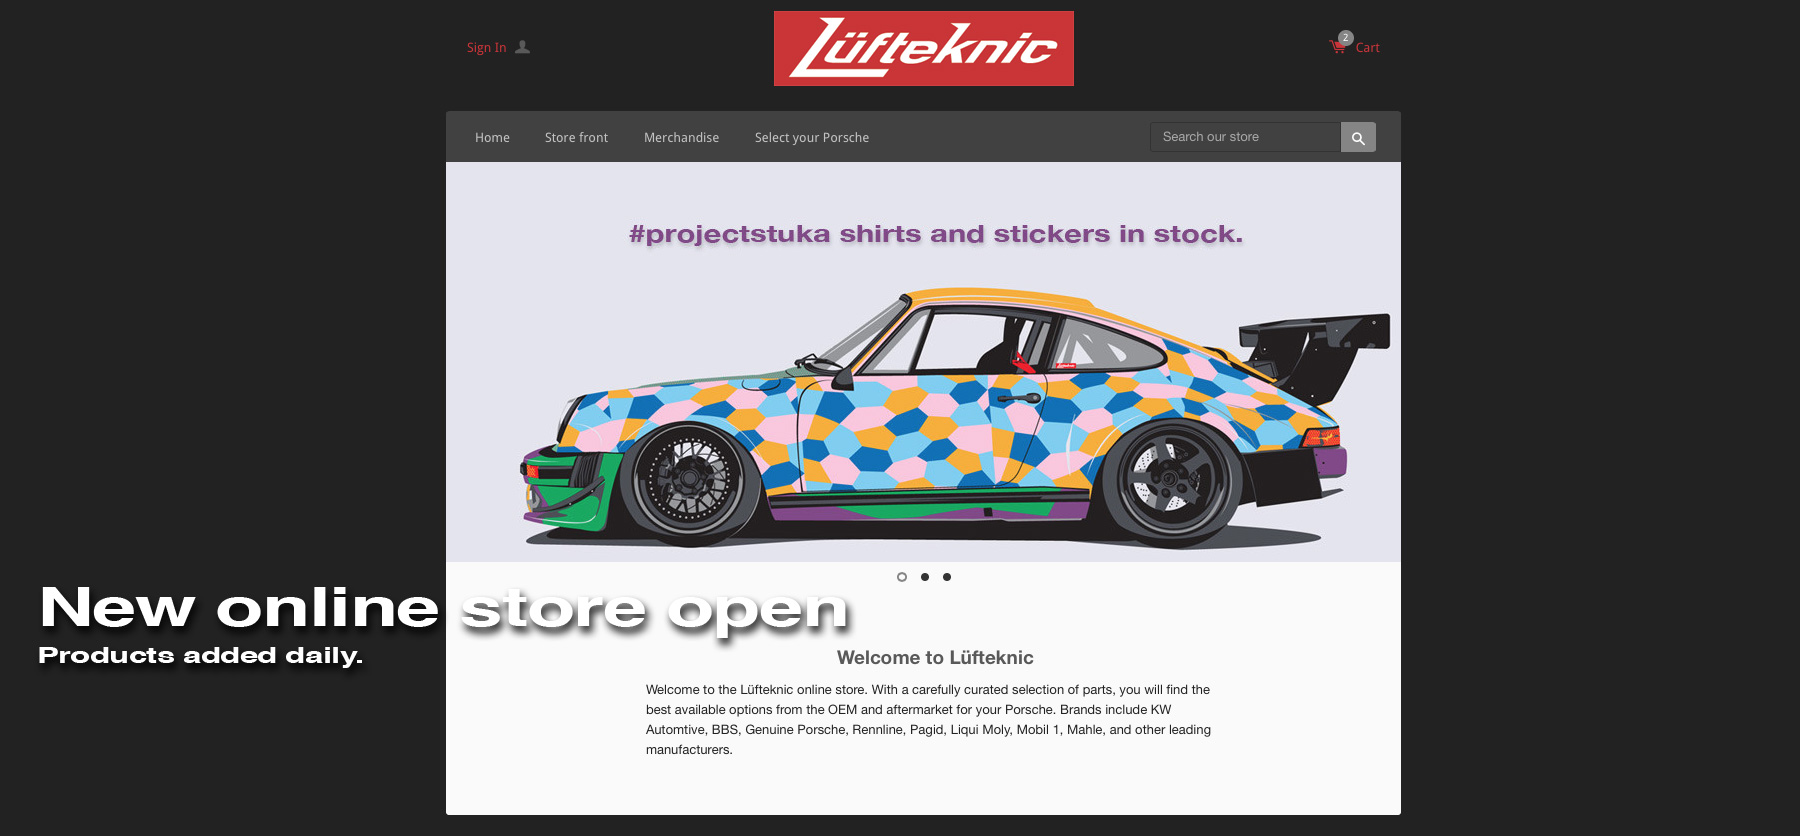 Store now open sider image showing the new Lufteknic online store front